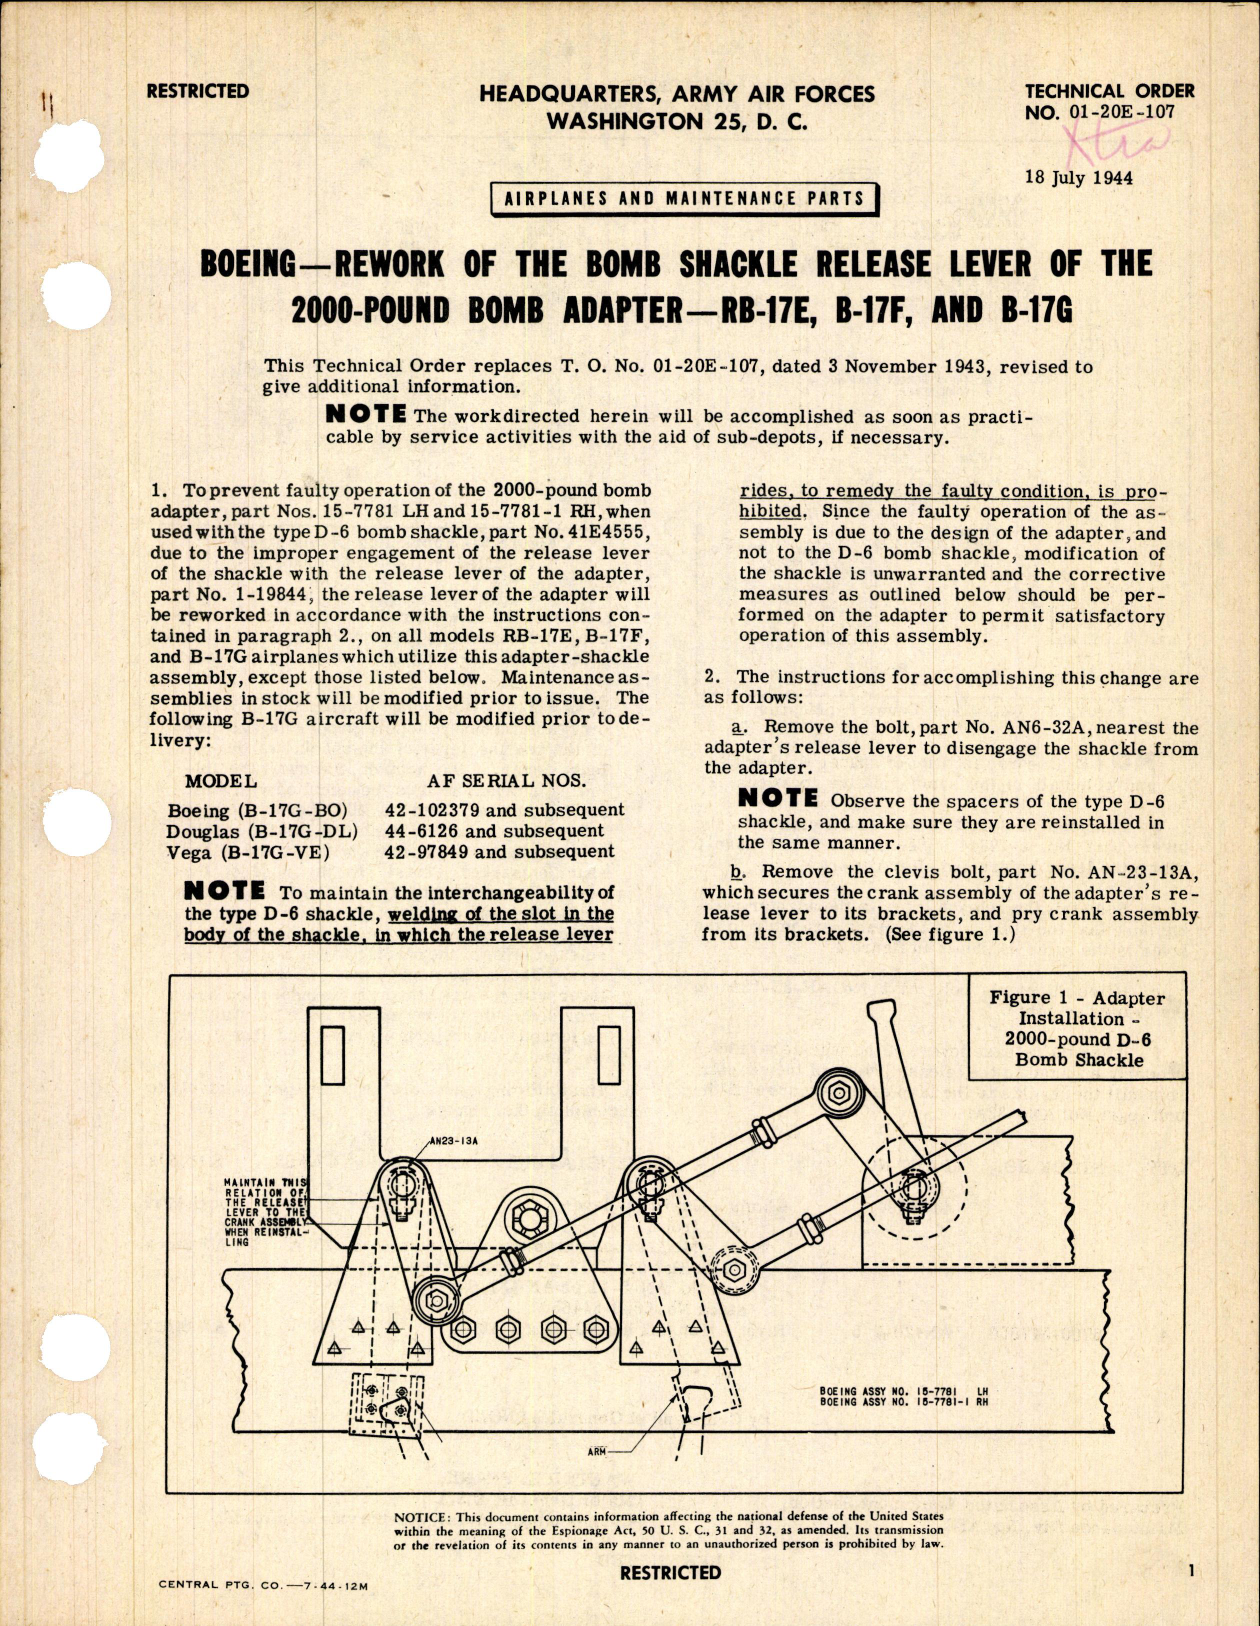 Sample page 1 from AirCorps Library document: Rework of the Bomb Shackle Release Lever of the 2000-Pound Bomb Adapter